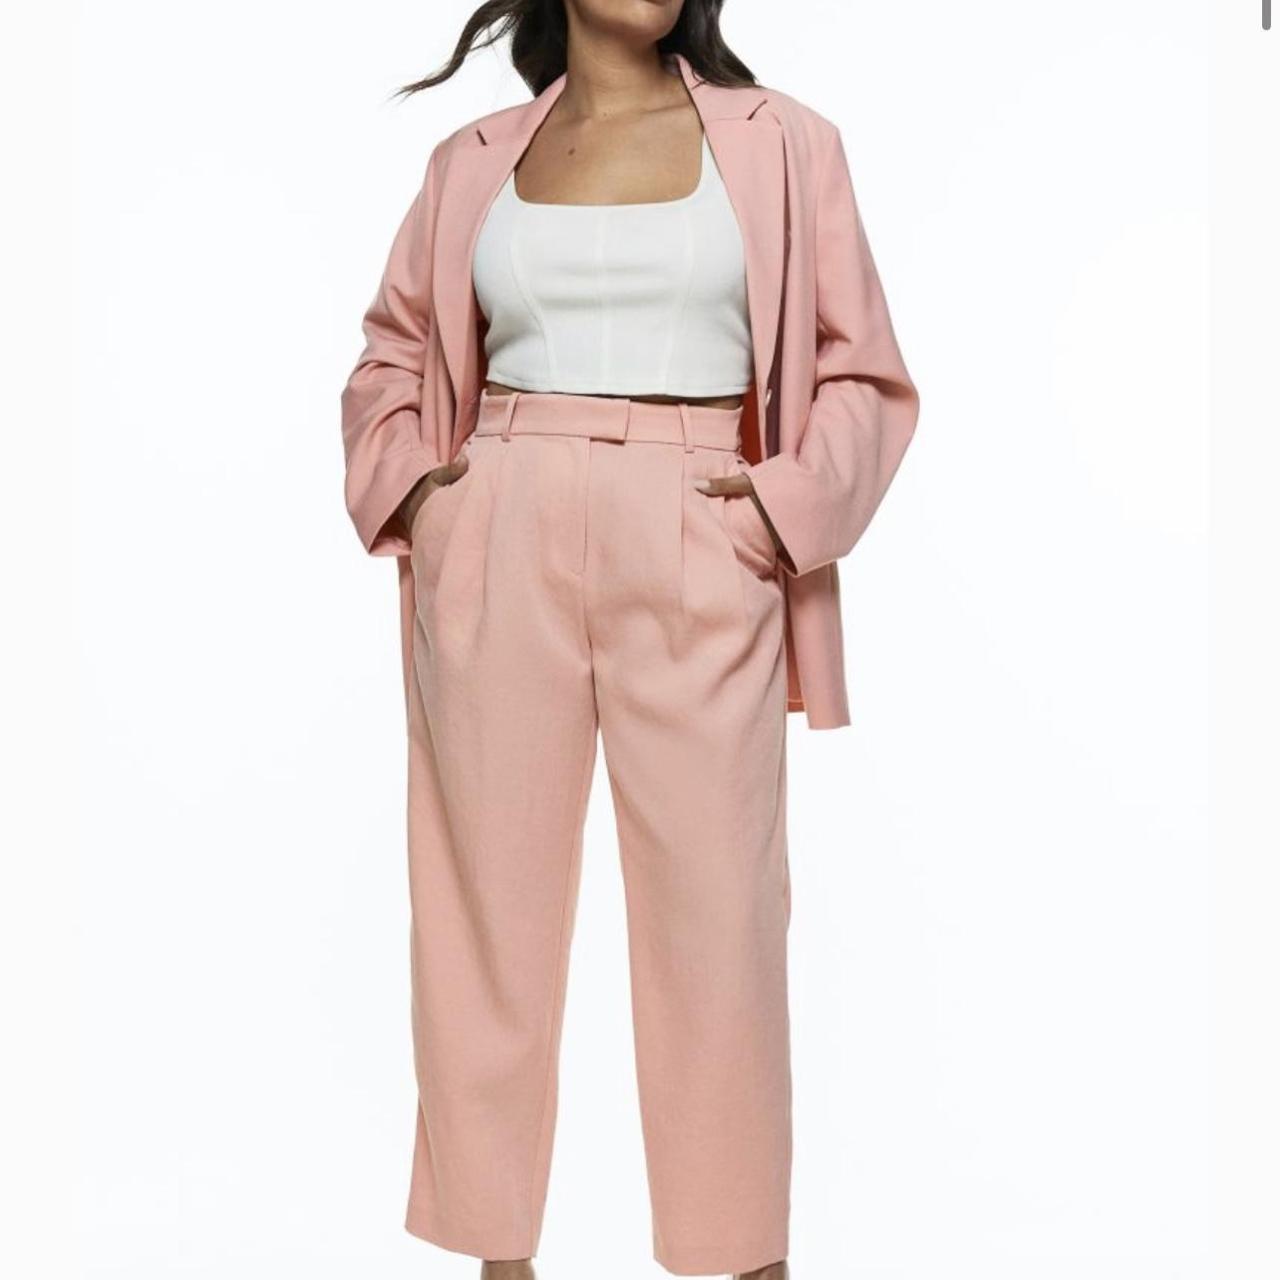 Baby Shower Pant Suits for Women